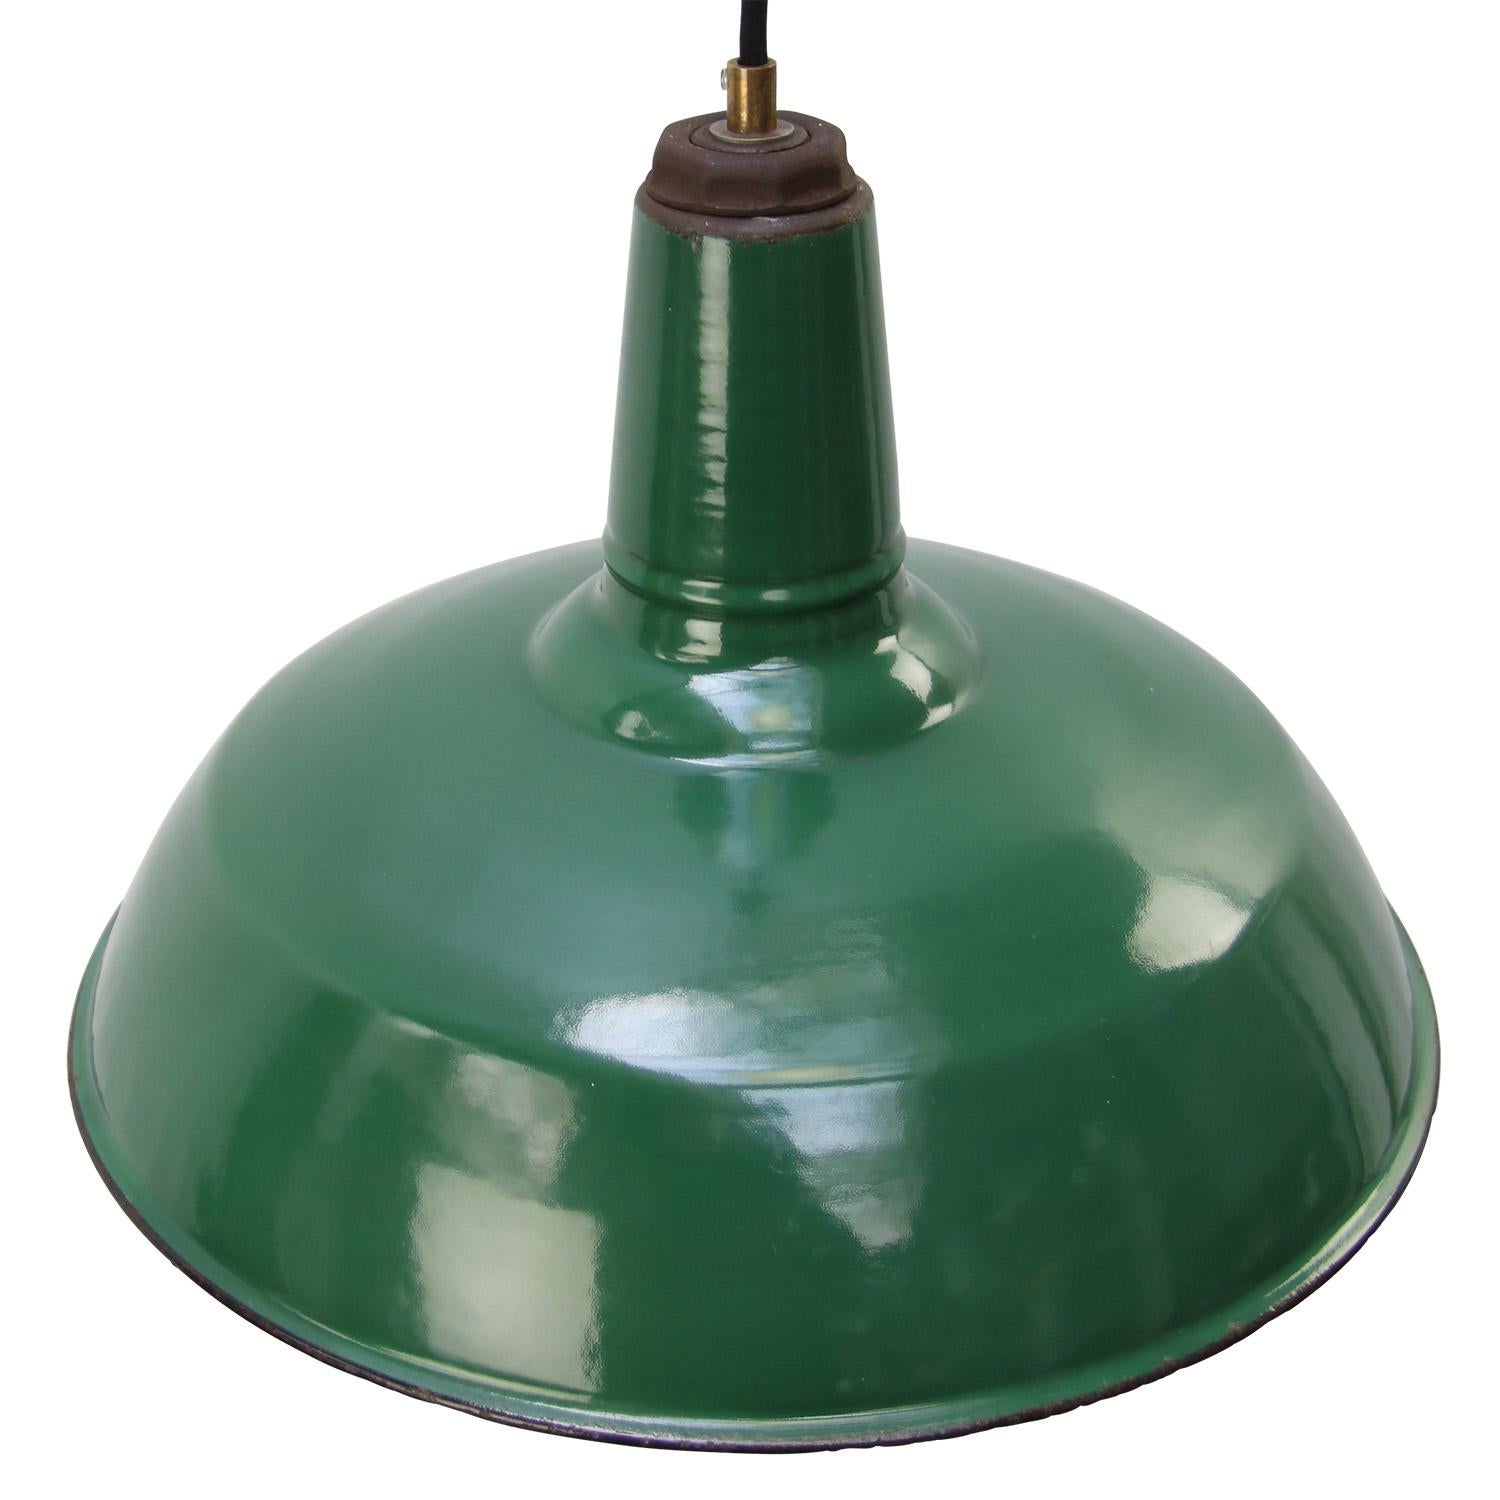 American industrial factory pendant light by Silvaking, USA
green enamel, white interior.
Rust metal top

Weight: 1.70 kg / 3.7 lb

Priced per individual item. All lamps have been made suitable by international standards for incandescent light